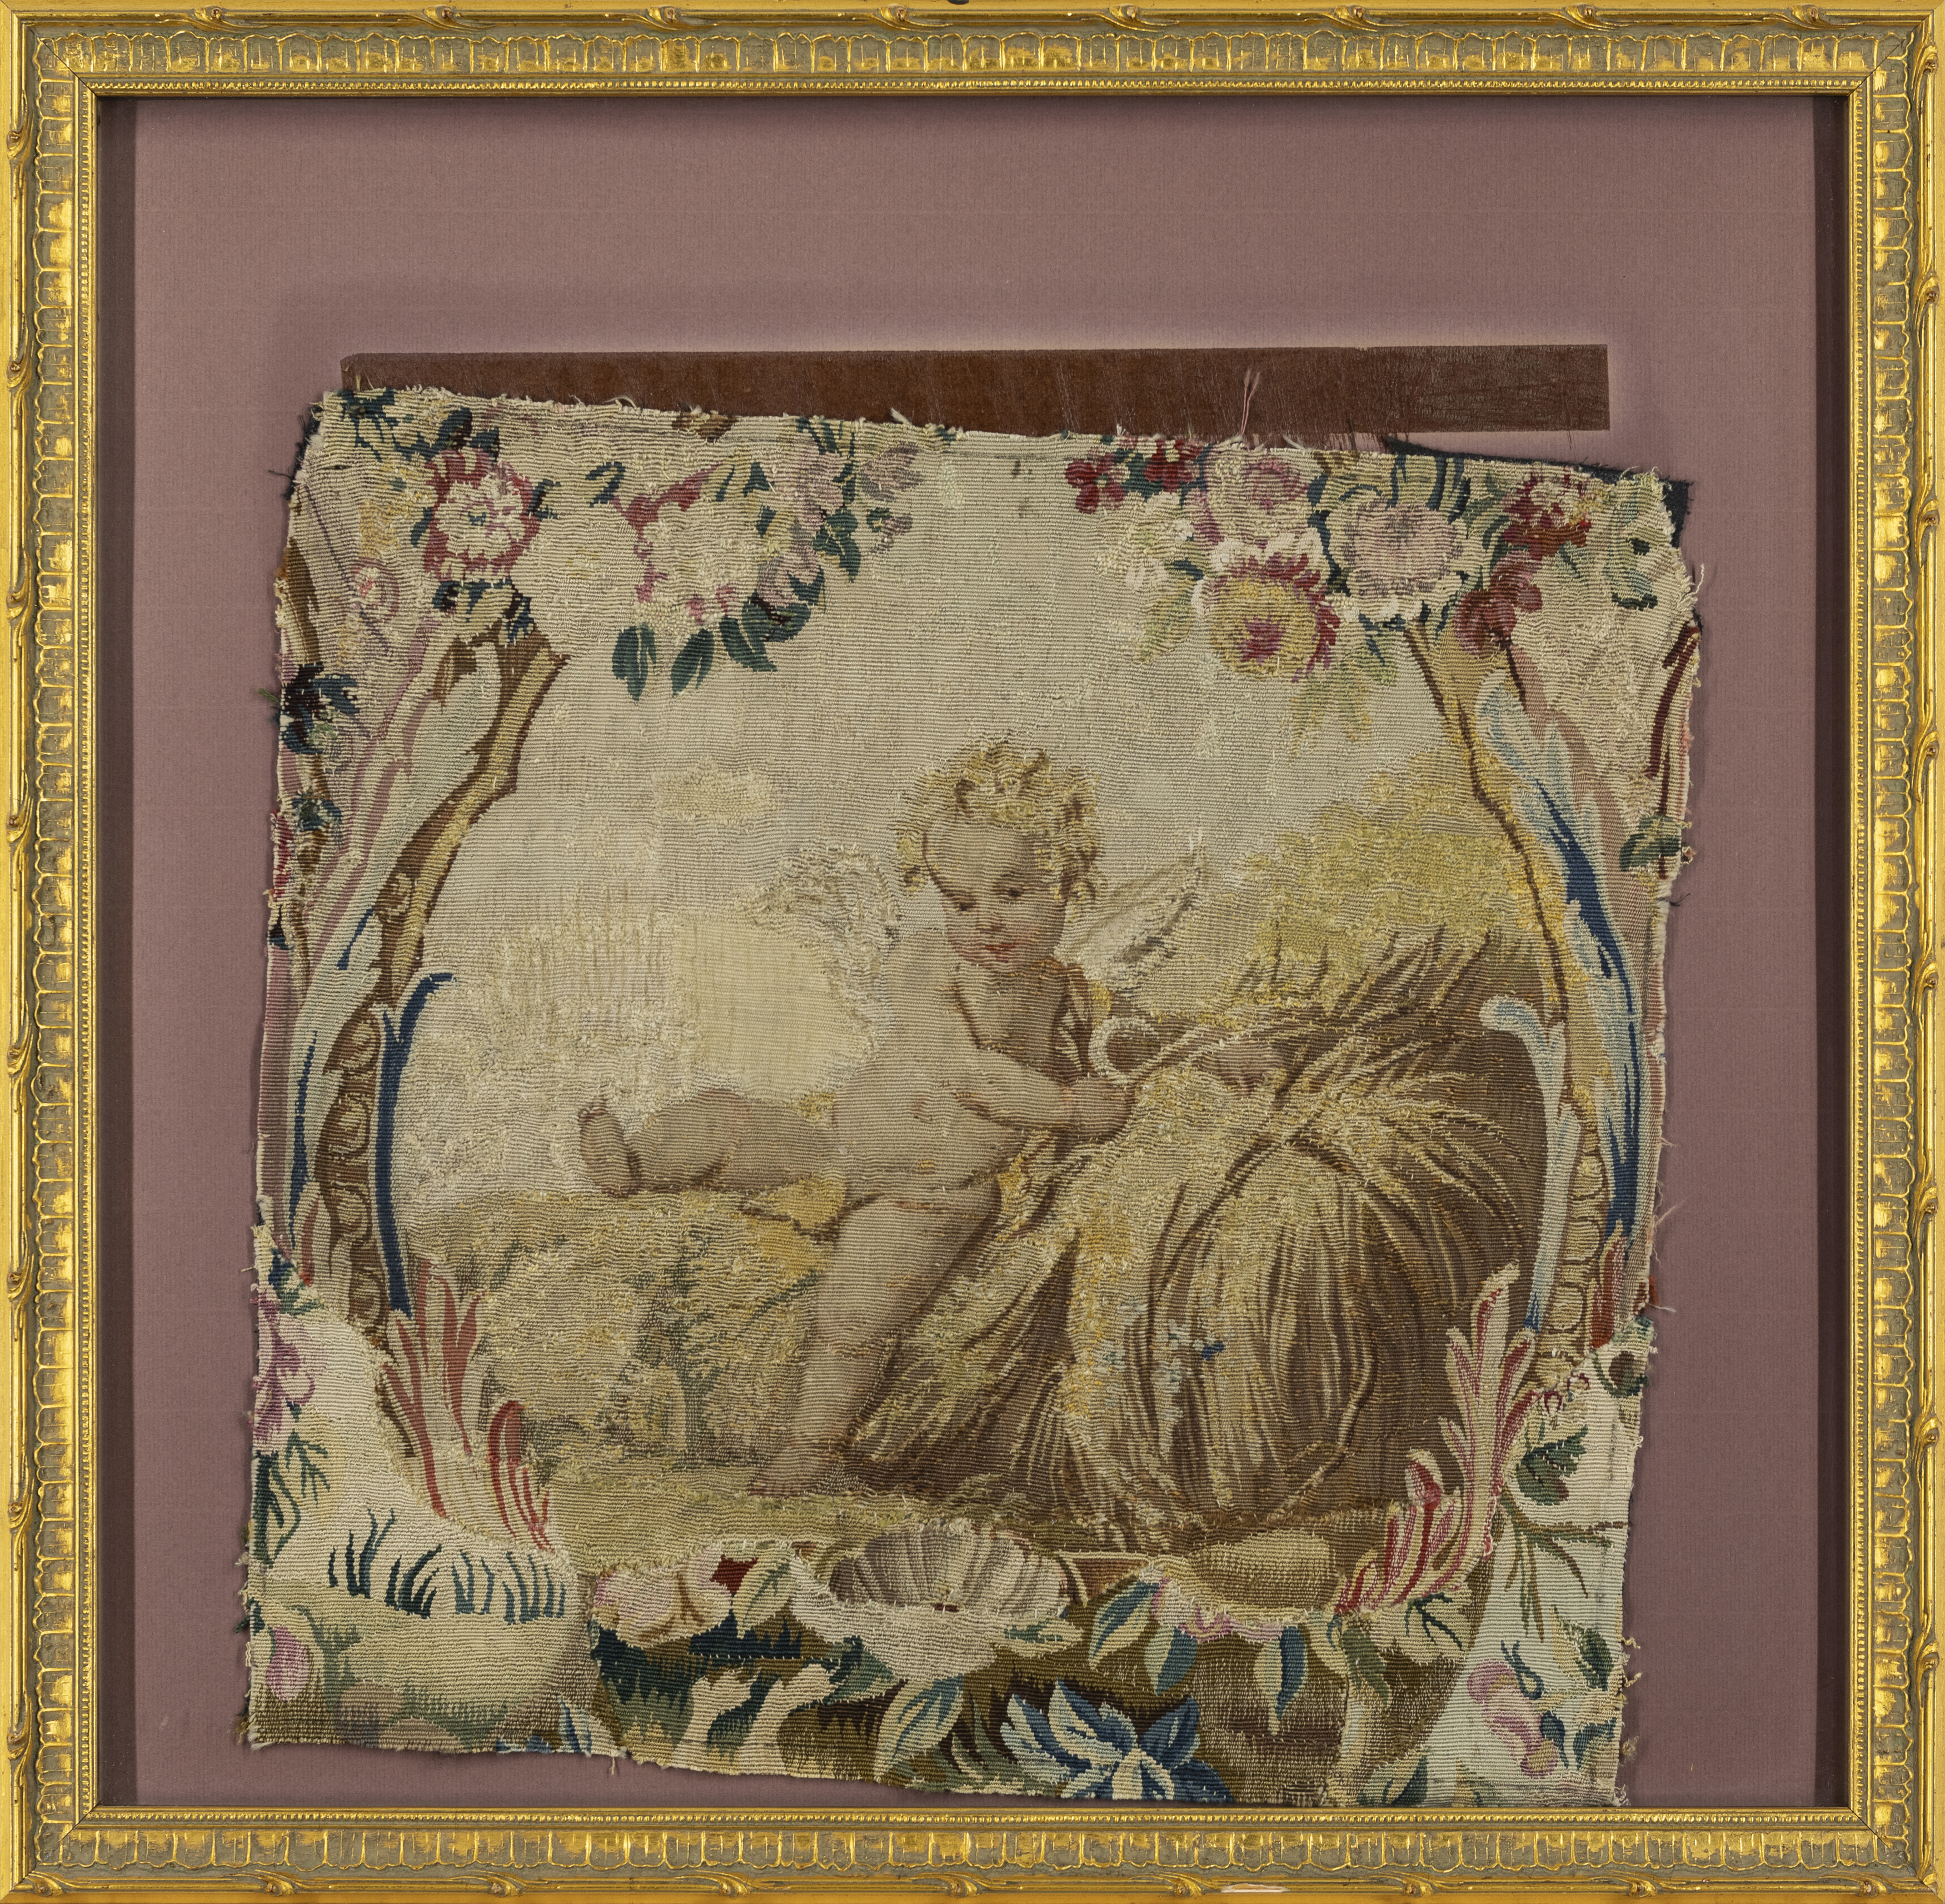 An Aubusson tapestry fragment, Second half 18th century, Woven in wools and silks, depicting a wi... - Image 2 of 2